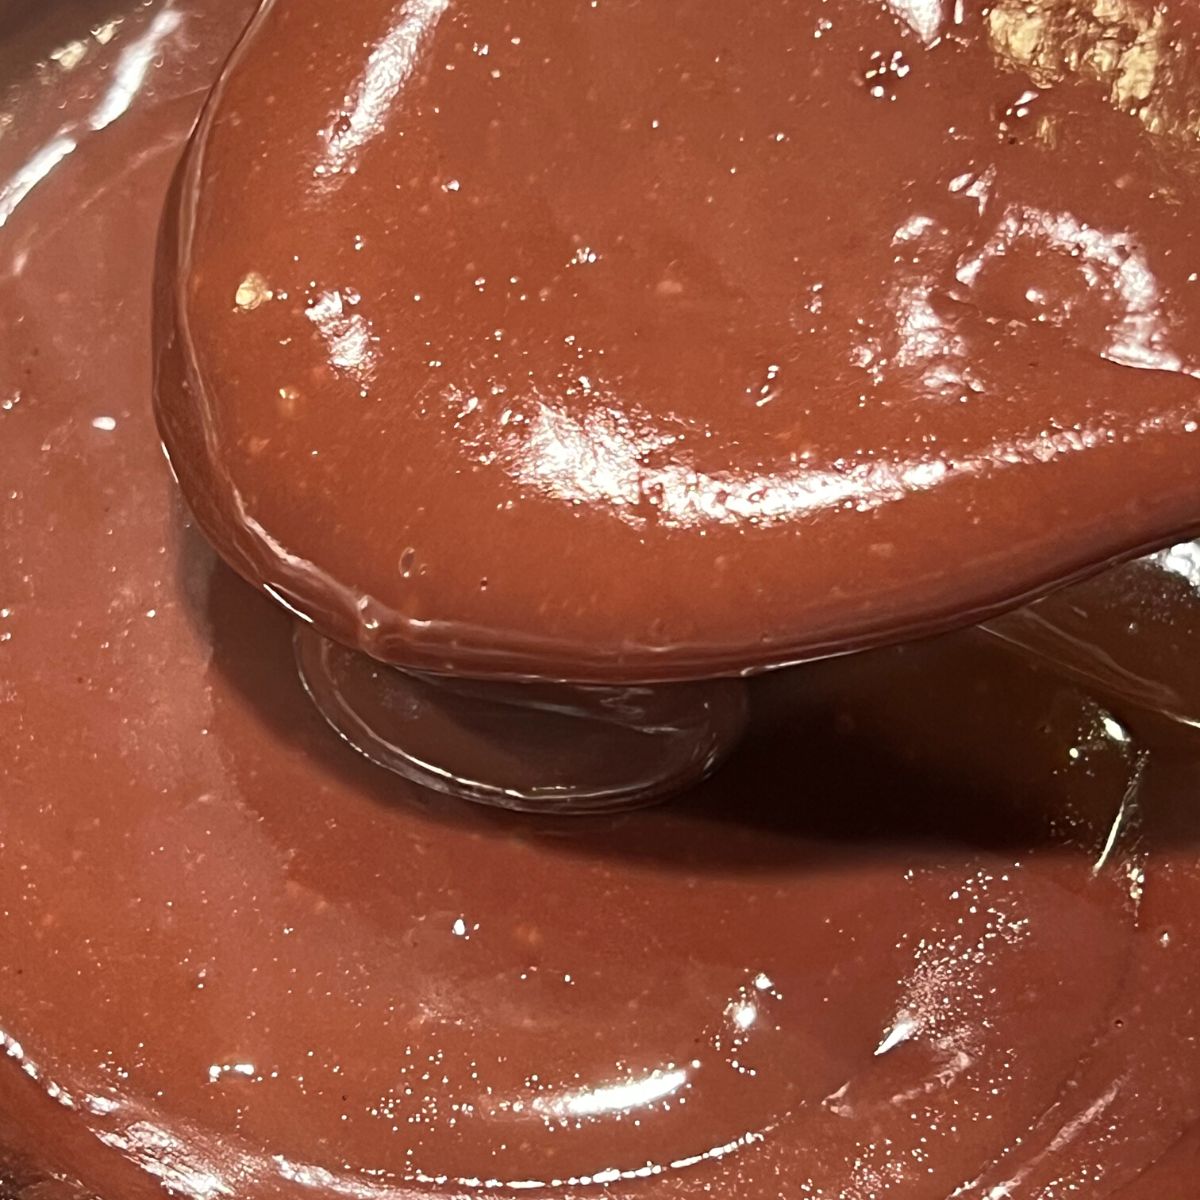 Smooth chocolate pudding on wooden spoon in saucepan.